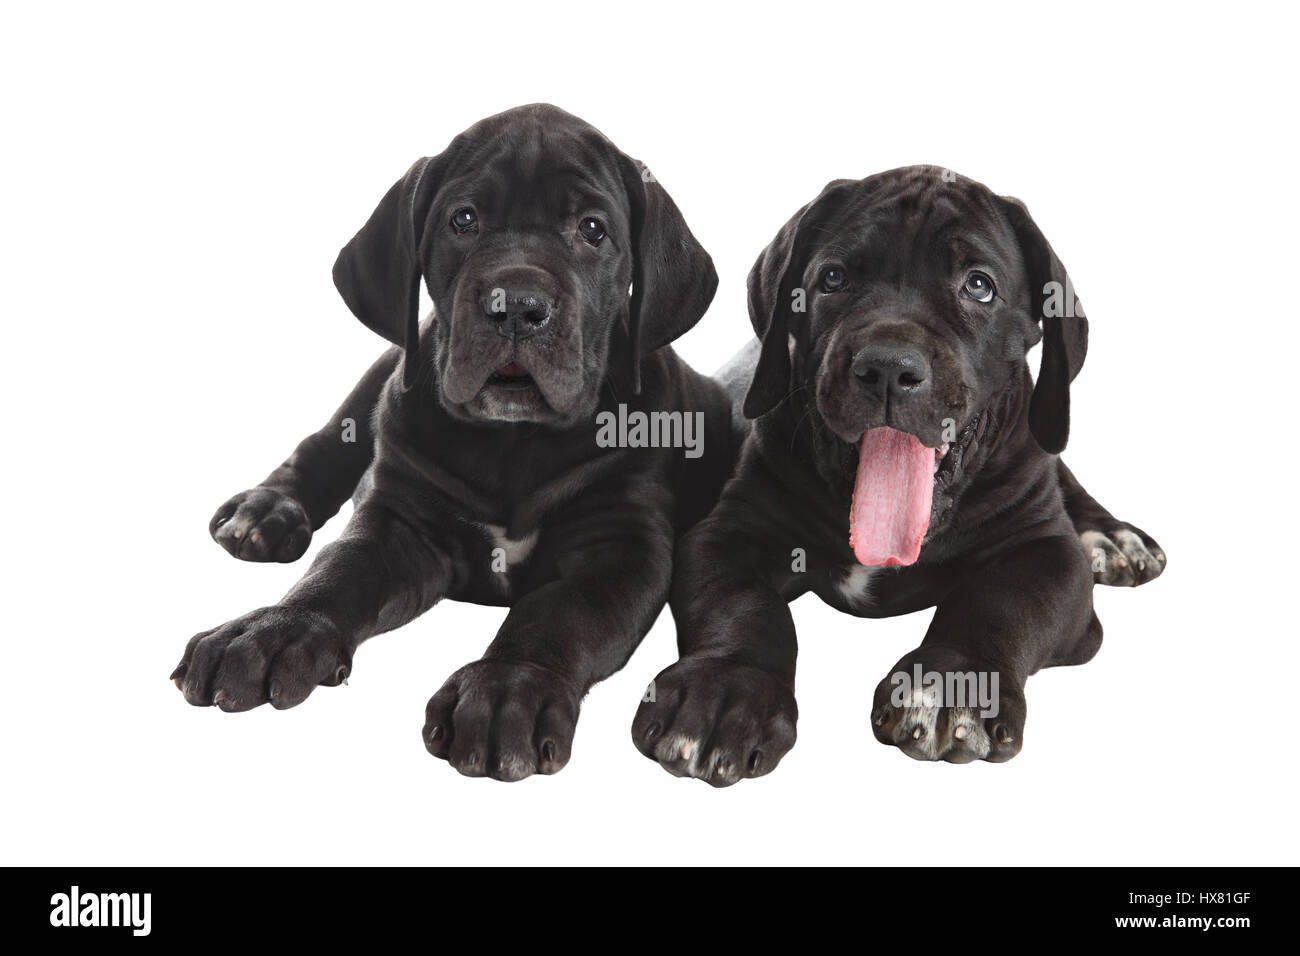 Two black Great Dane puppies, Studio shot, isolated on white background. Stock Photo